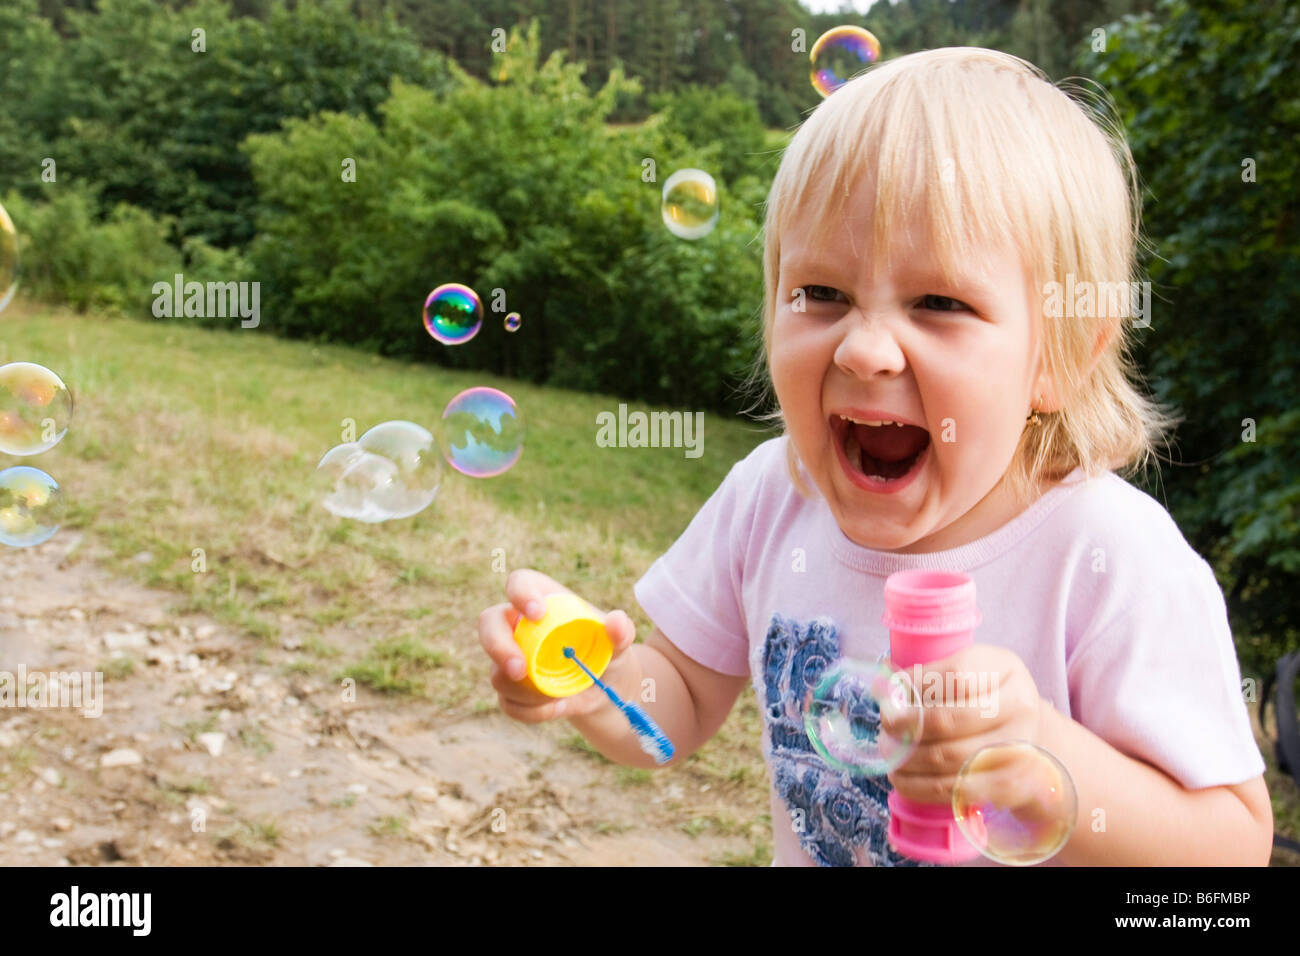 Girl, 5 years old, with bubbles Stock Photo